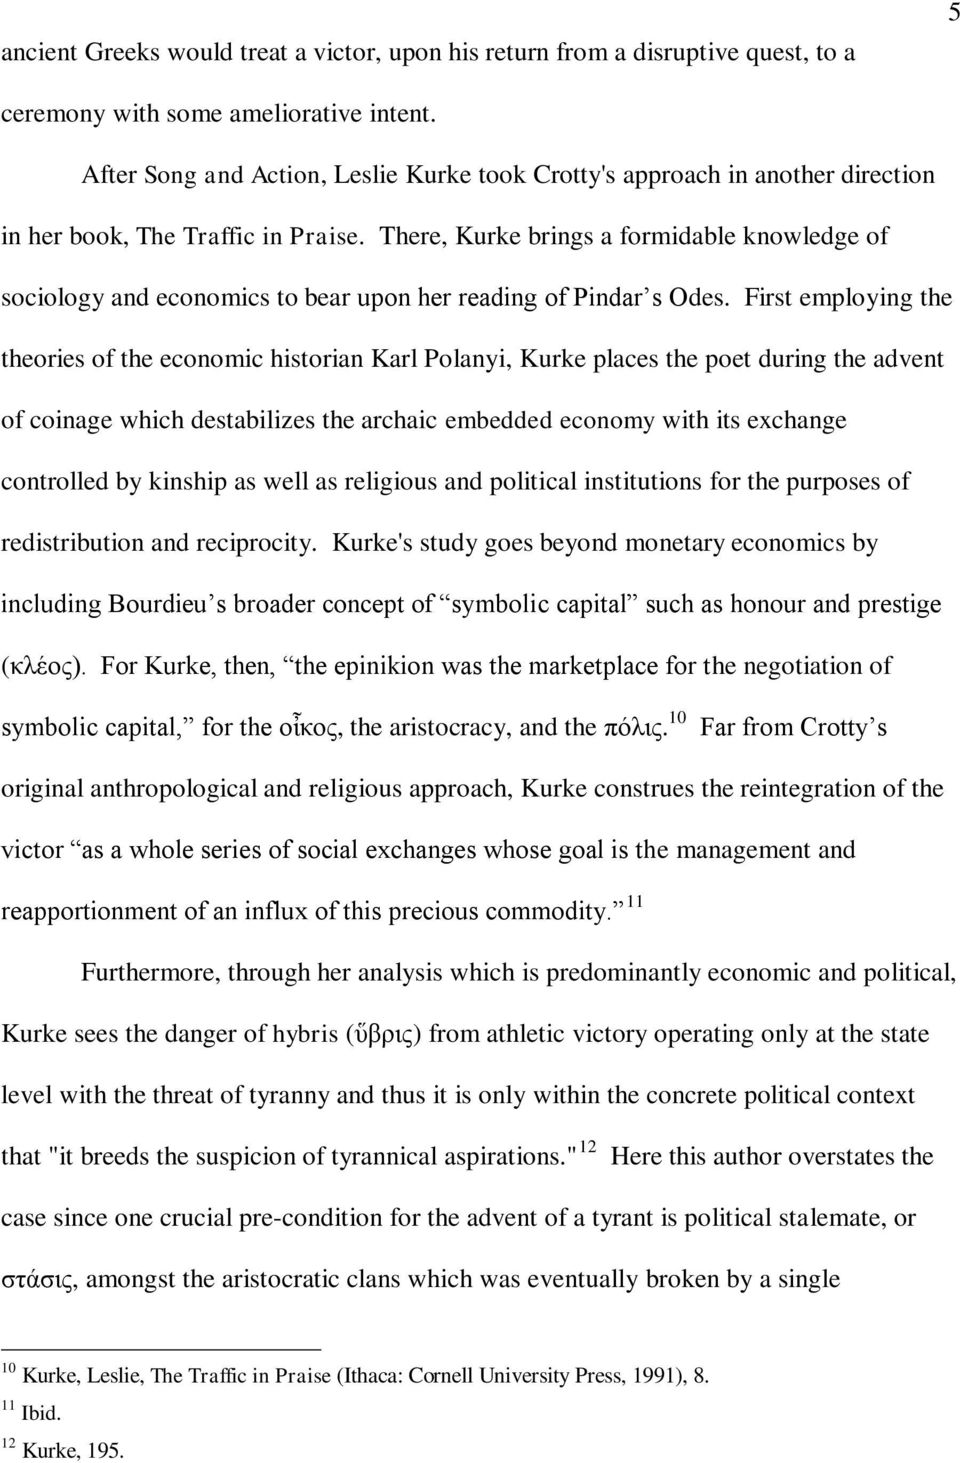 There, Kurke brings a formidable knowledge of sociology and economics to bear upon her reading of Pindar s Odes.